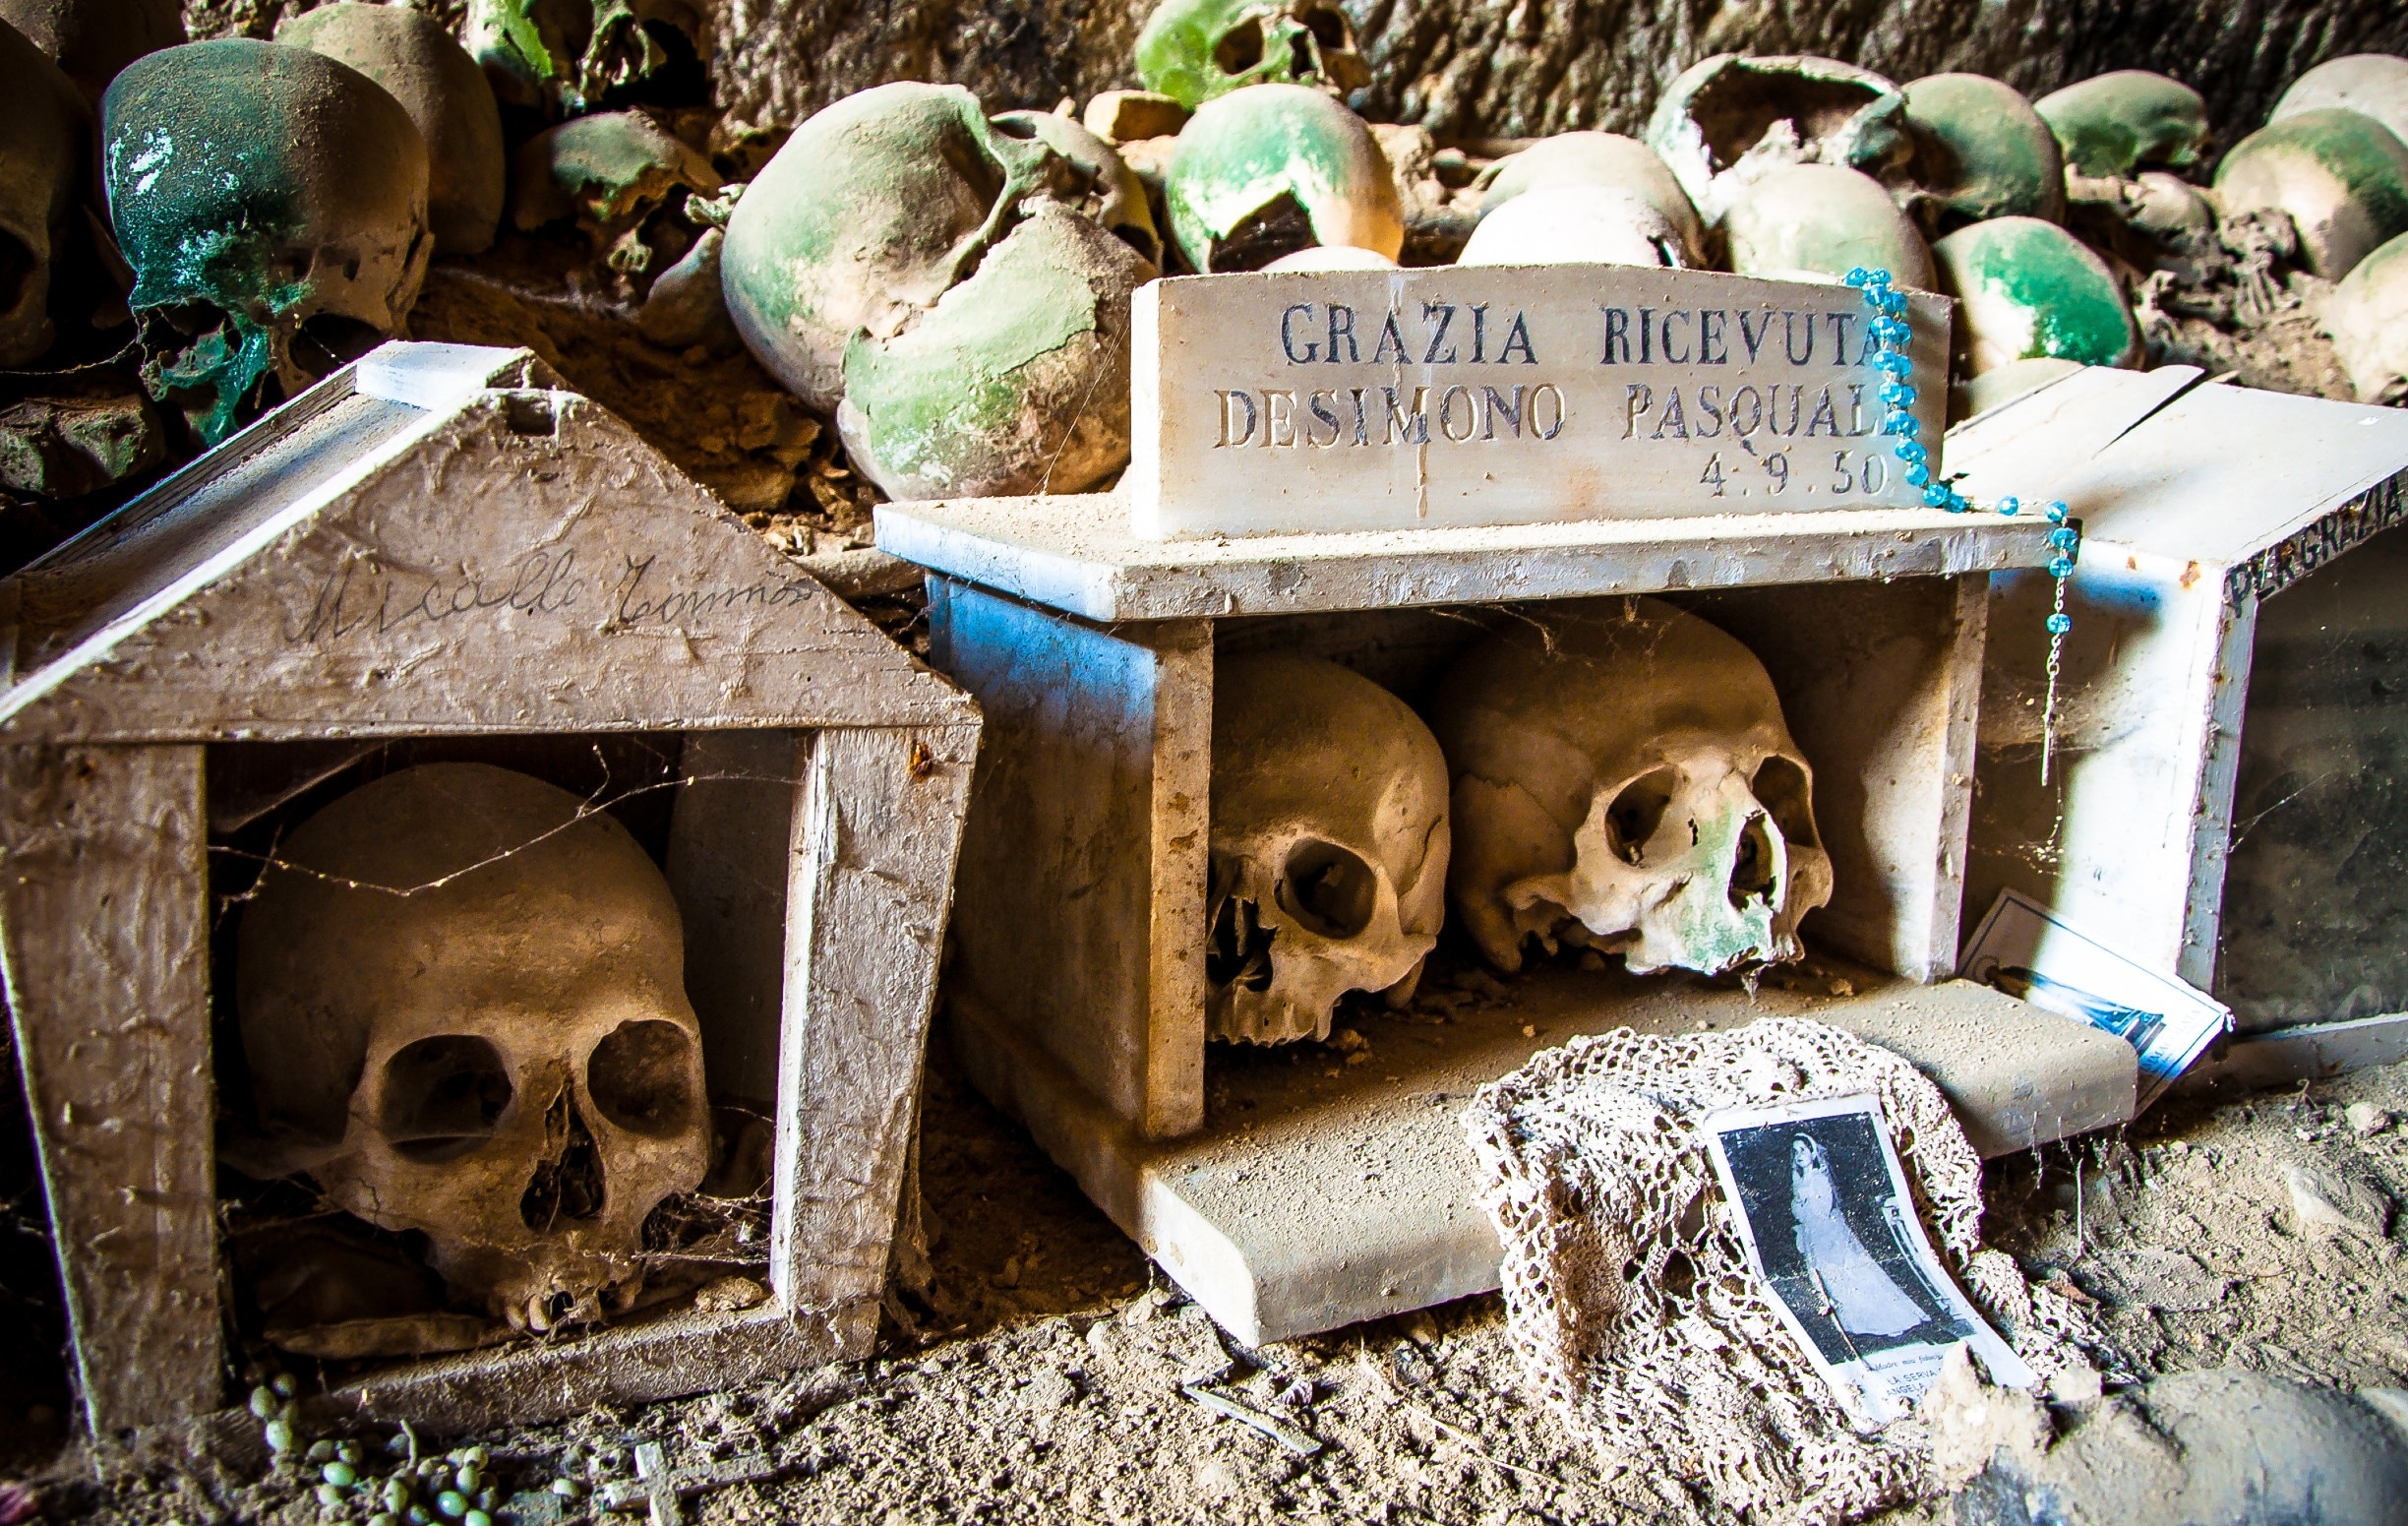 The Fontanelle cemetery in Naples is a charnel house, an ossuary, located in a cave in the tuff hillside in the Materdei section of the city. It is associated with an important chapter in the folklore of the city.